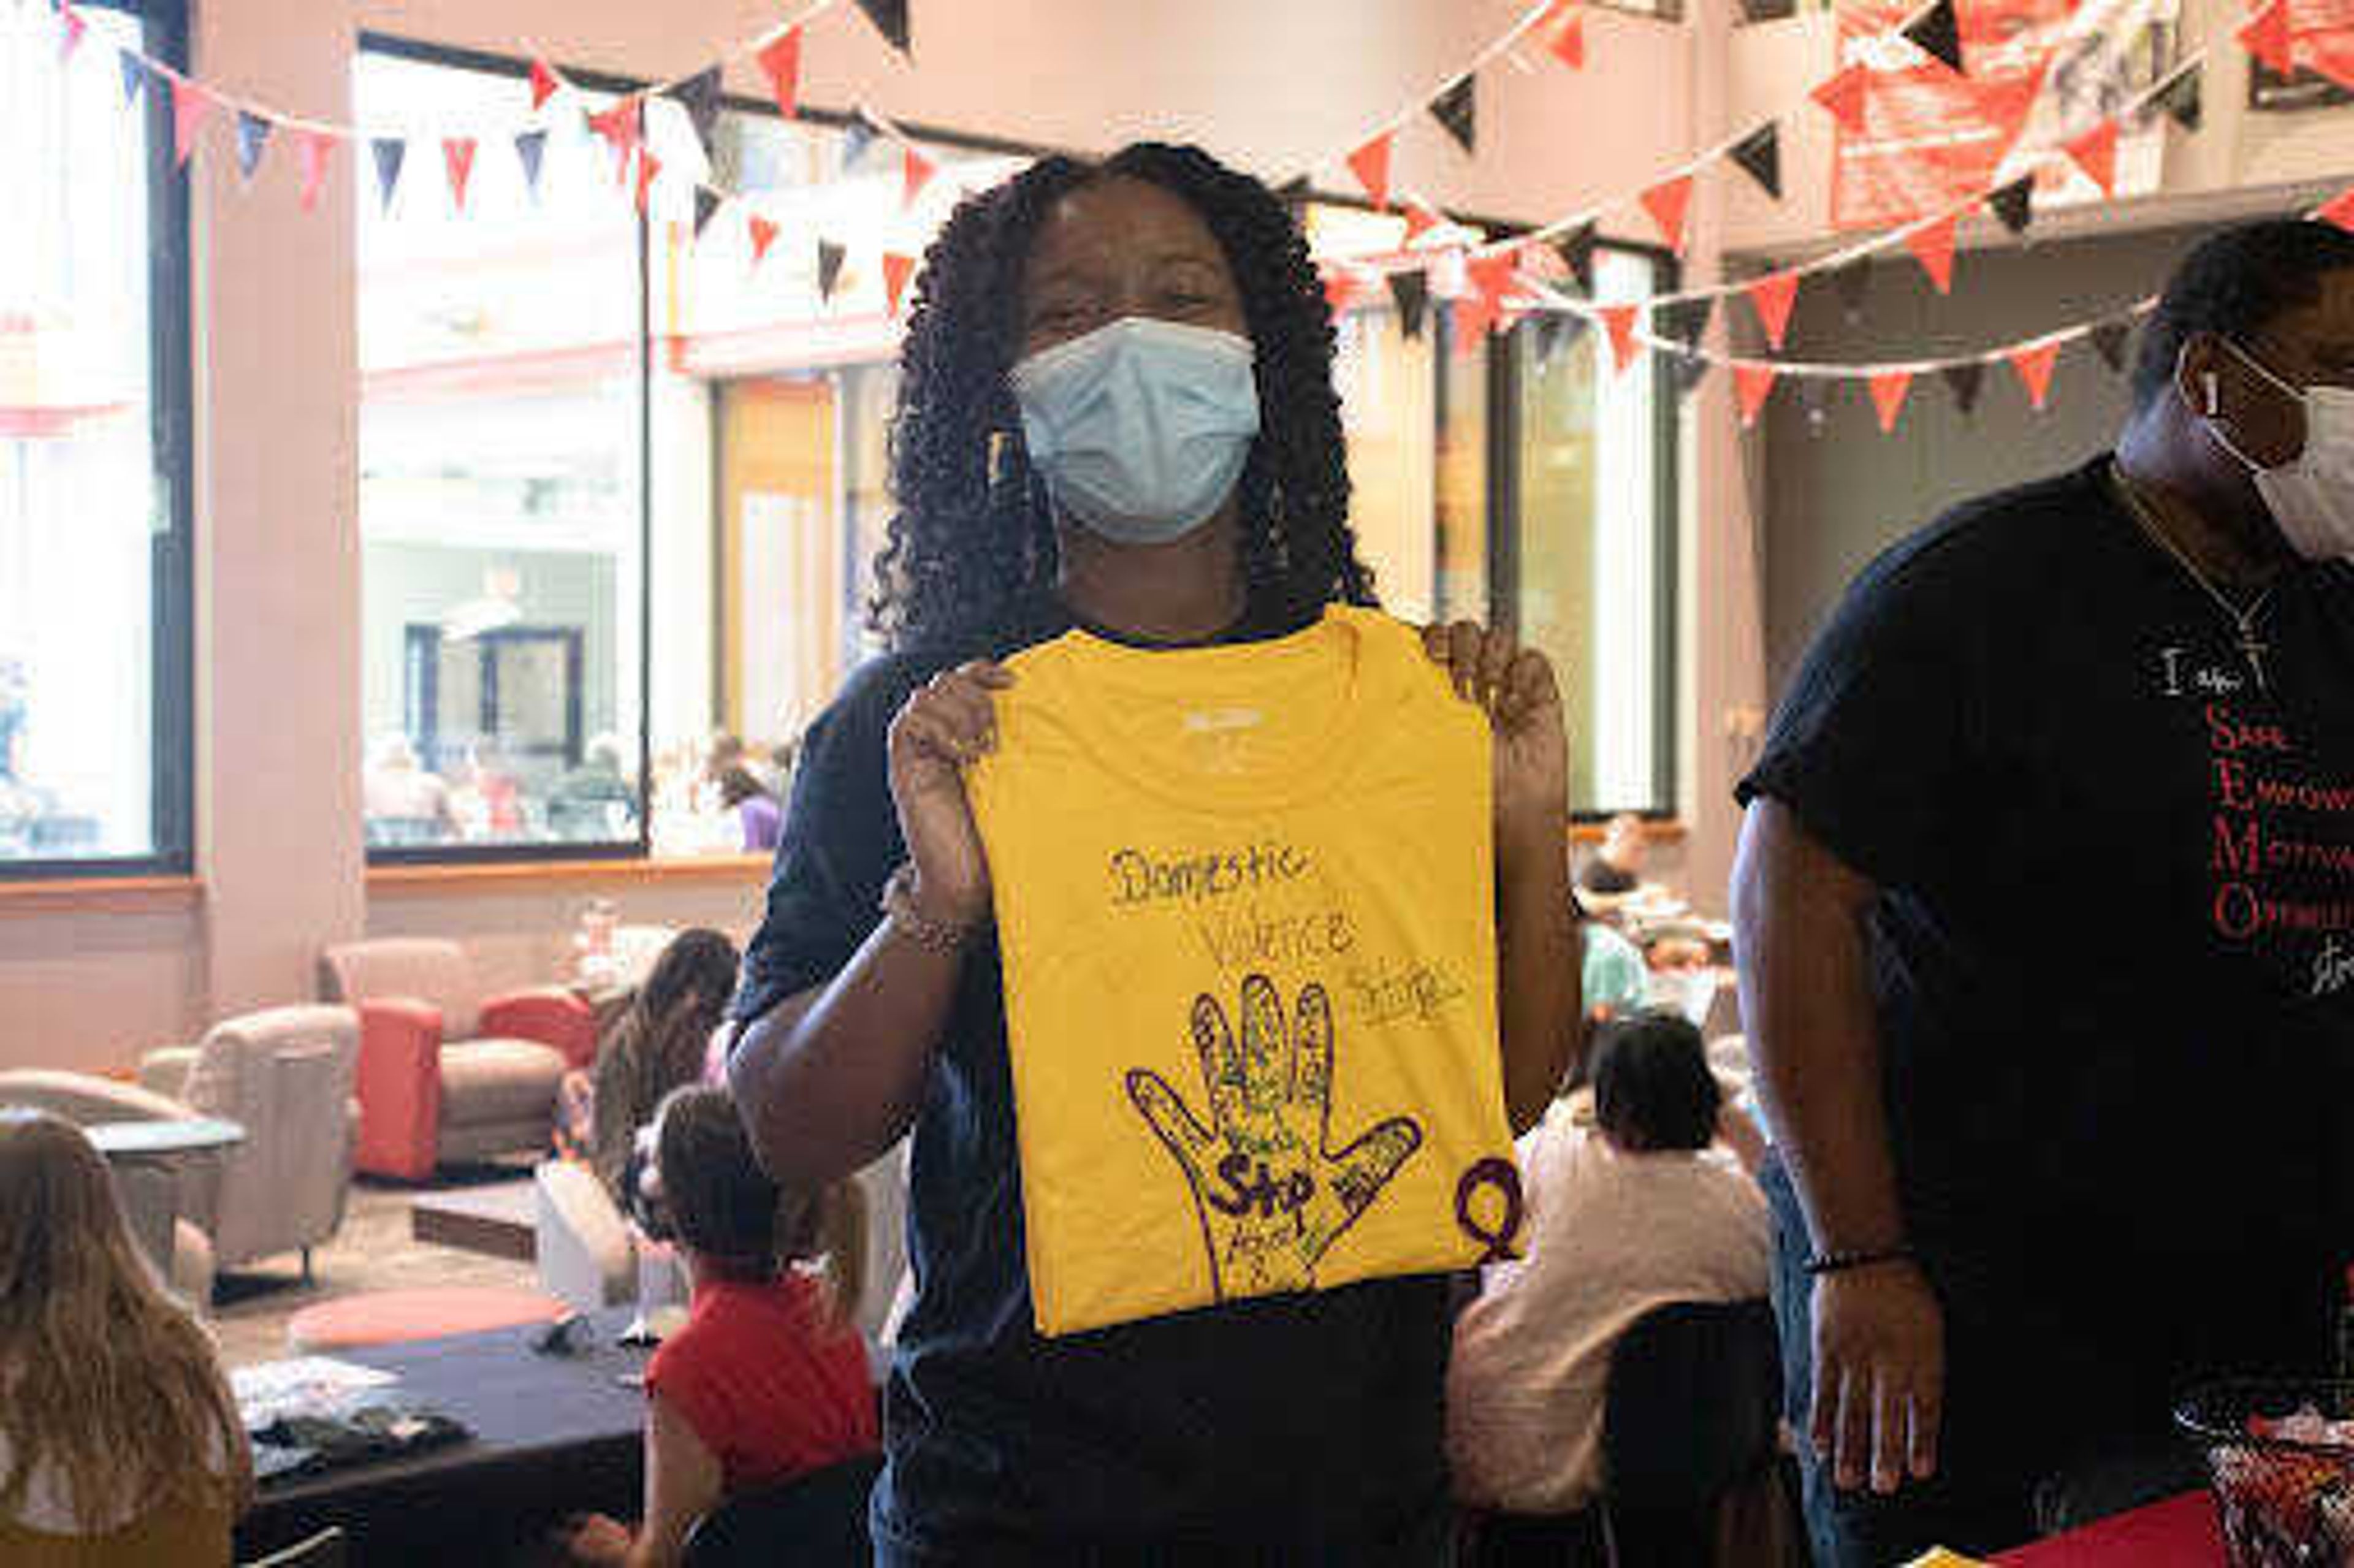 Shannon Washington, graduate assistant for Campus Violence Prevention, poses for a photo at the Health and Wellness Fair. Many different t-shirts were available for students, including those reading “I am SEMO Strong” and “Let’s Talk SEMO”. 